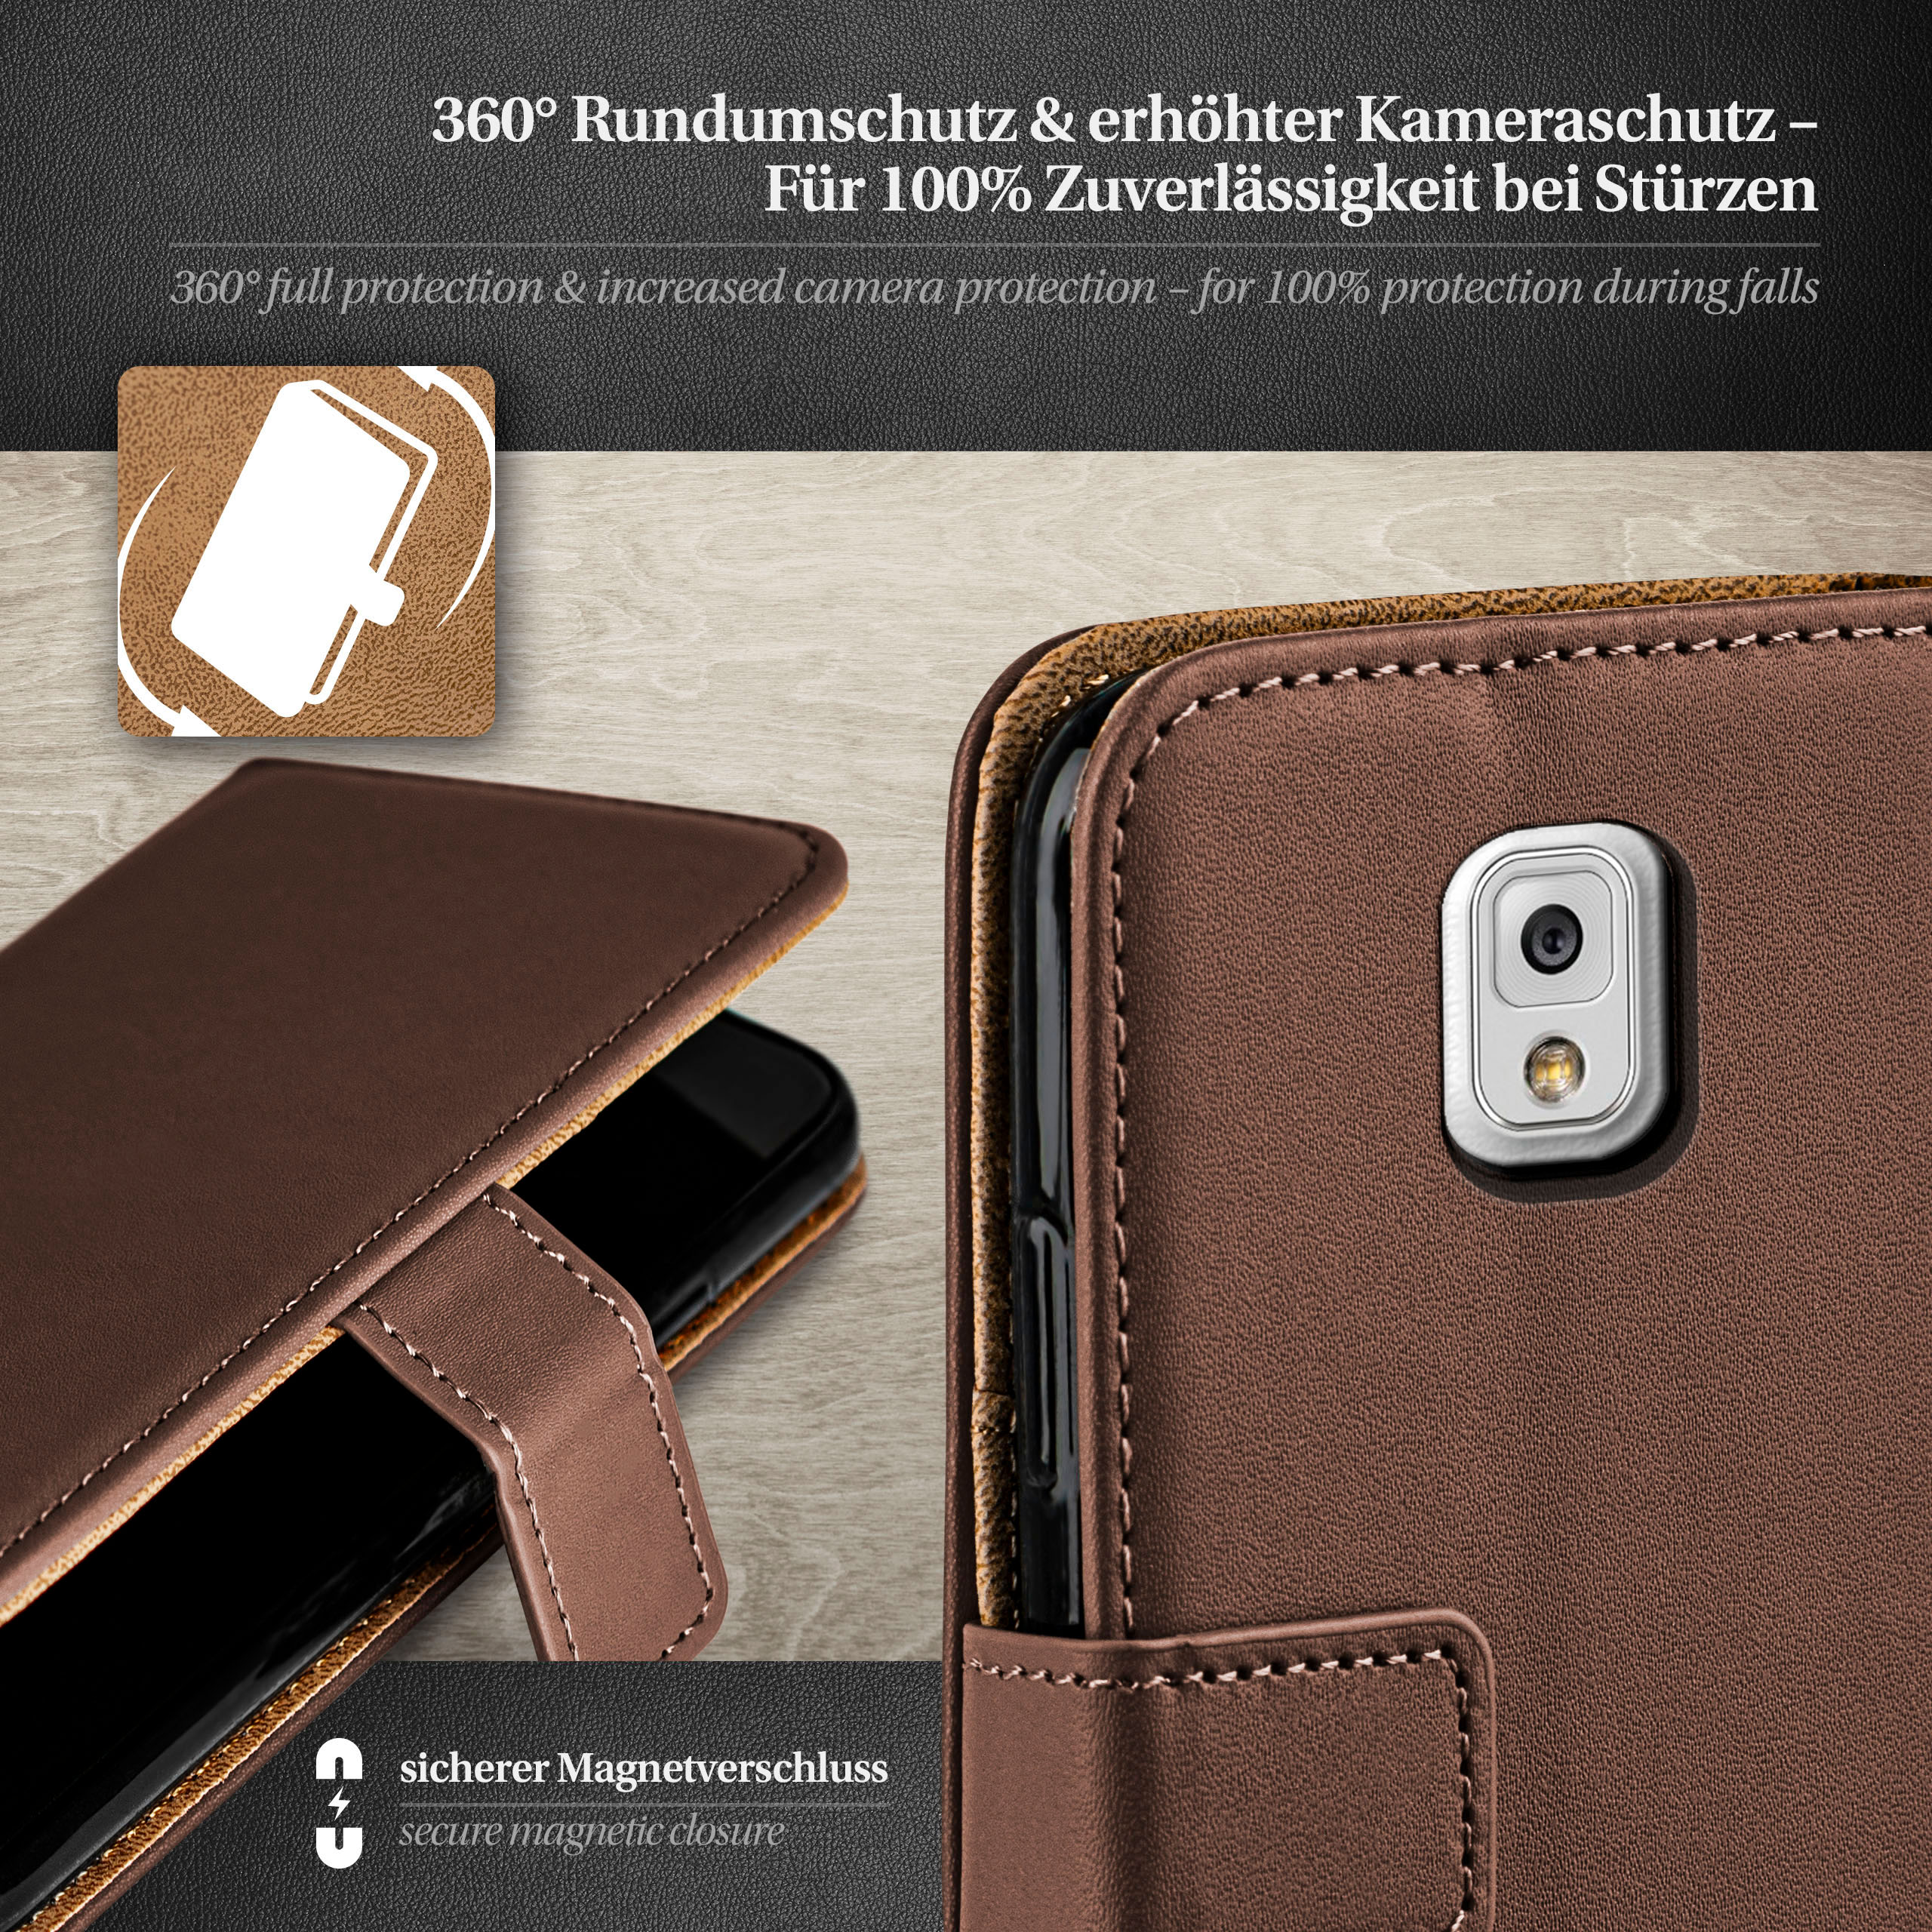 MOEX Book Case, Bookcover, Galaxy Samsung, Oxide-Brown Note 3